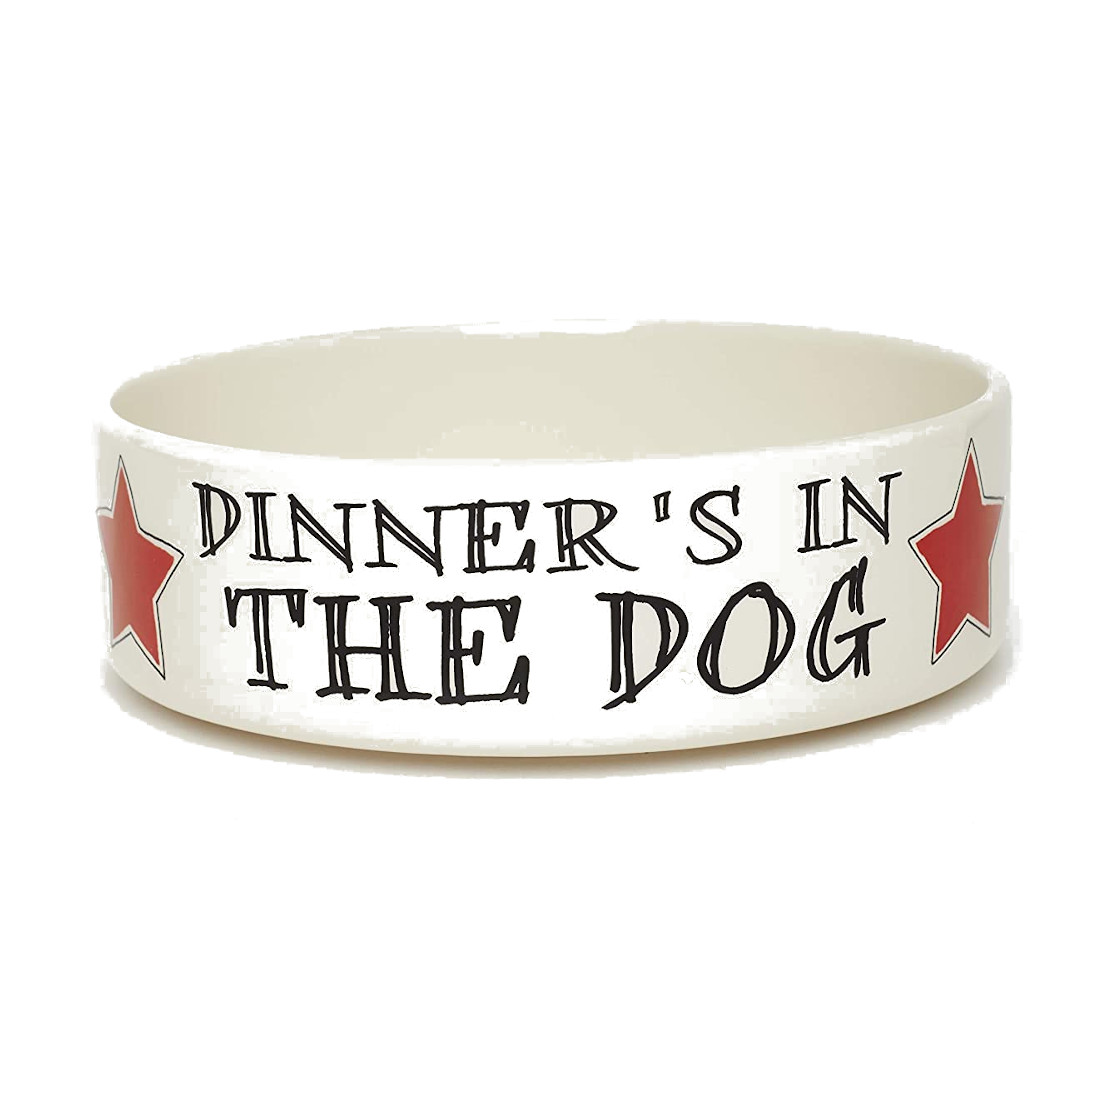 Sweet William Dinners In The Dog - Small Dog Bowl